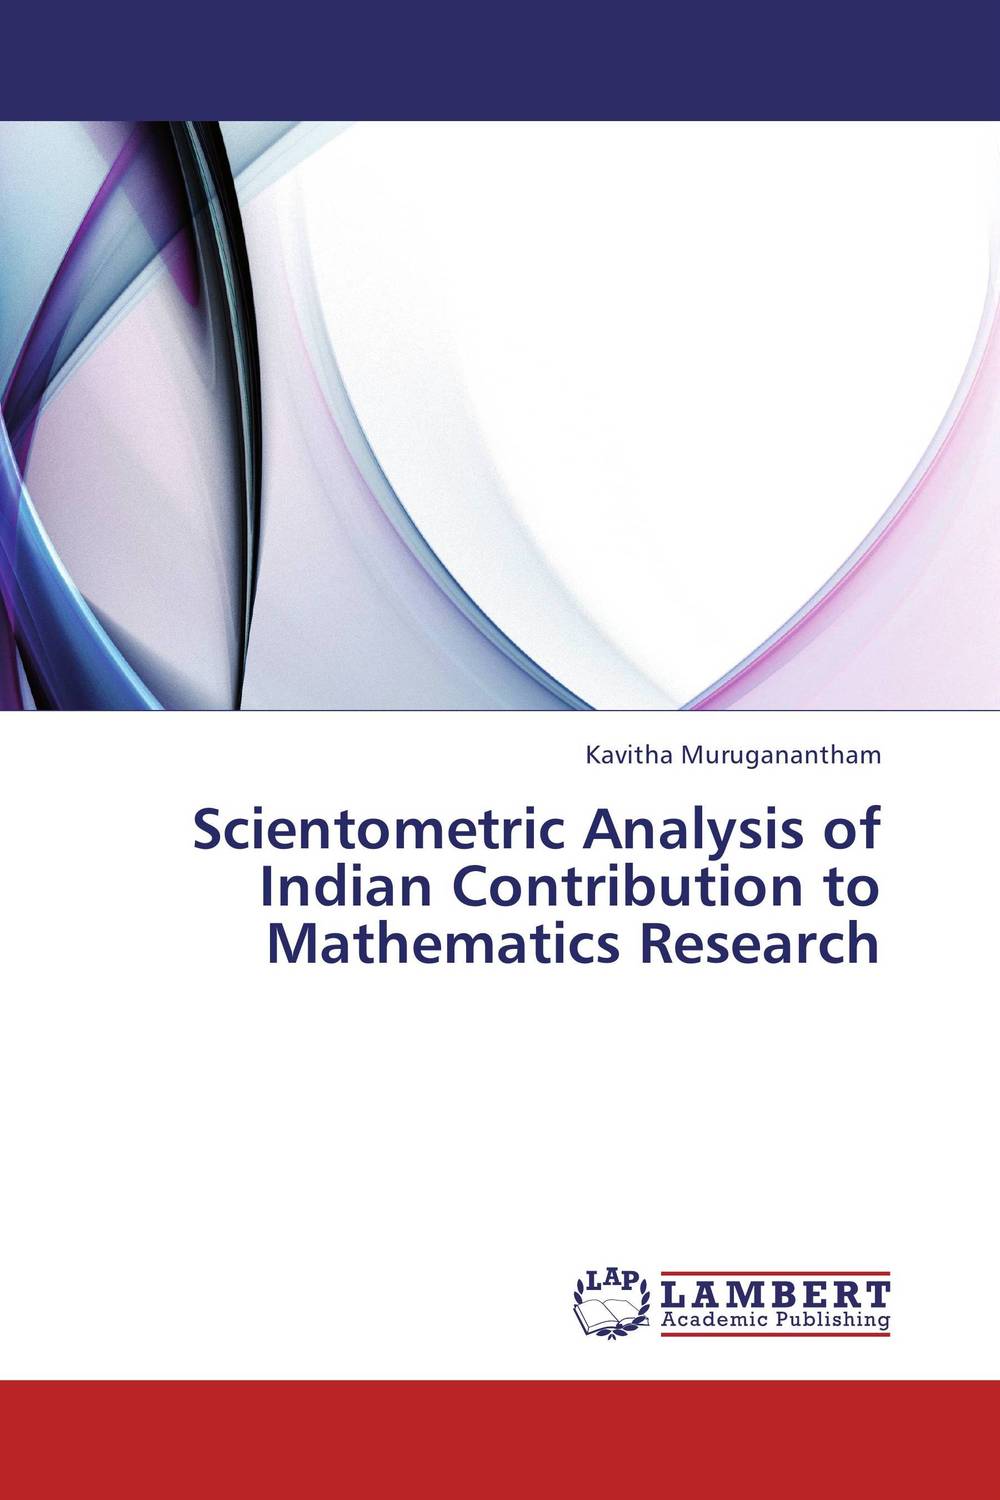 Scientometric Analysis of Indian Contribution to Mathematics Research